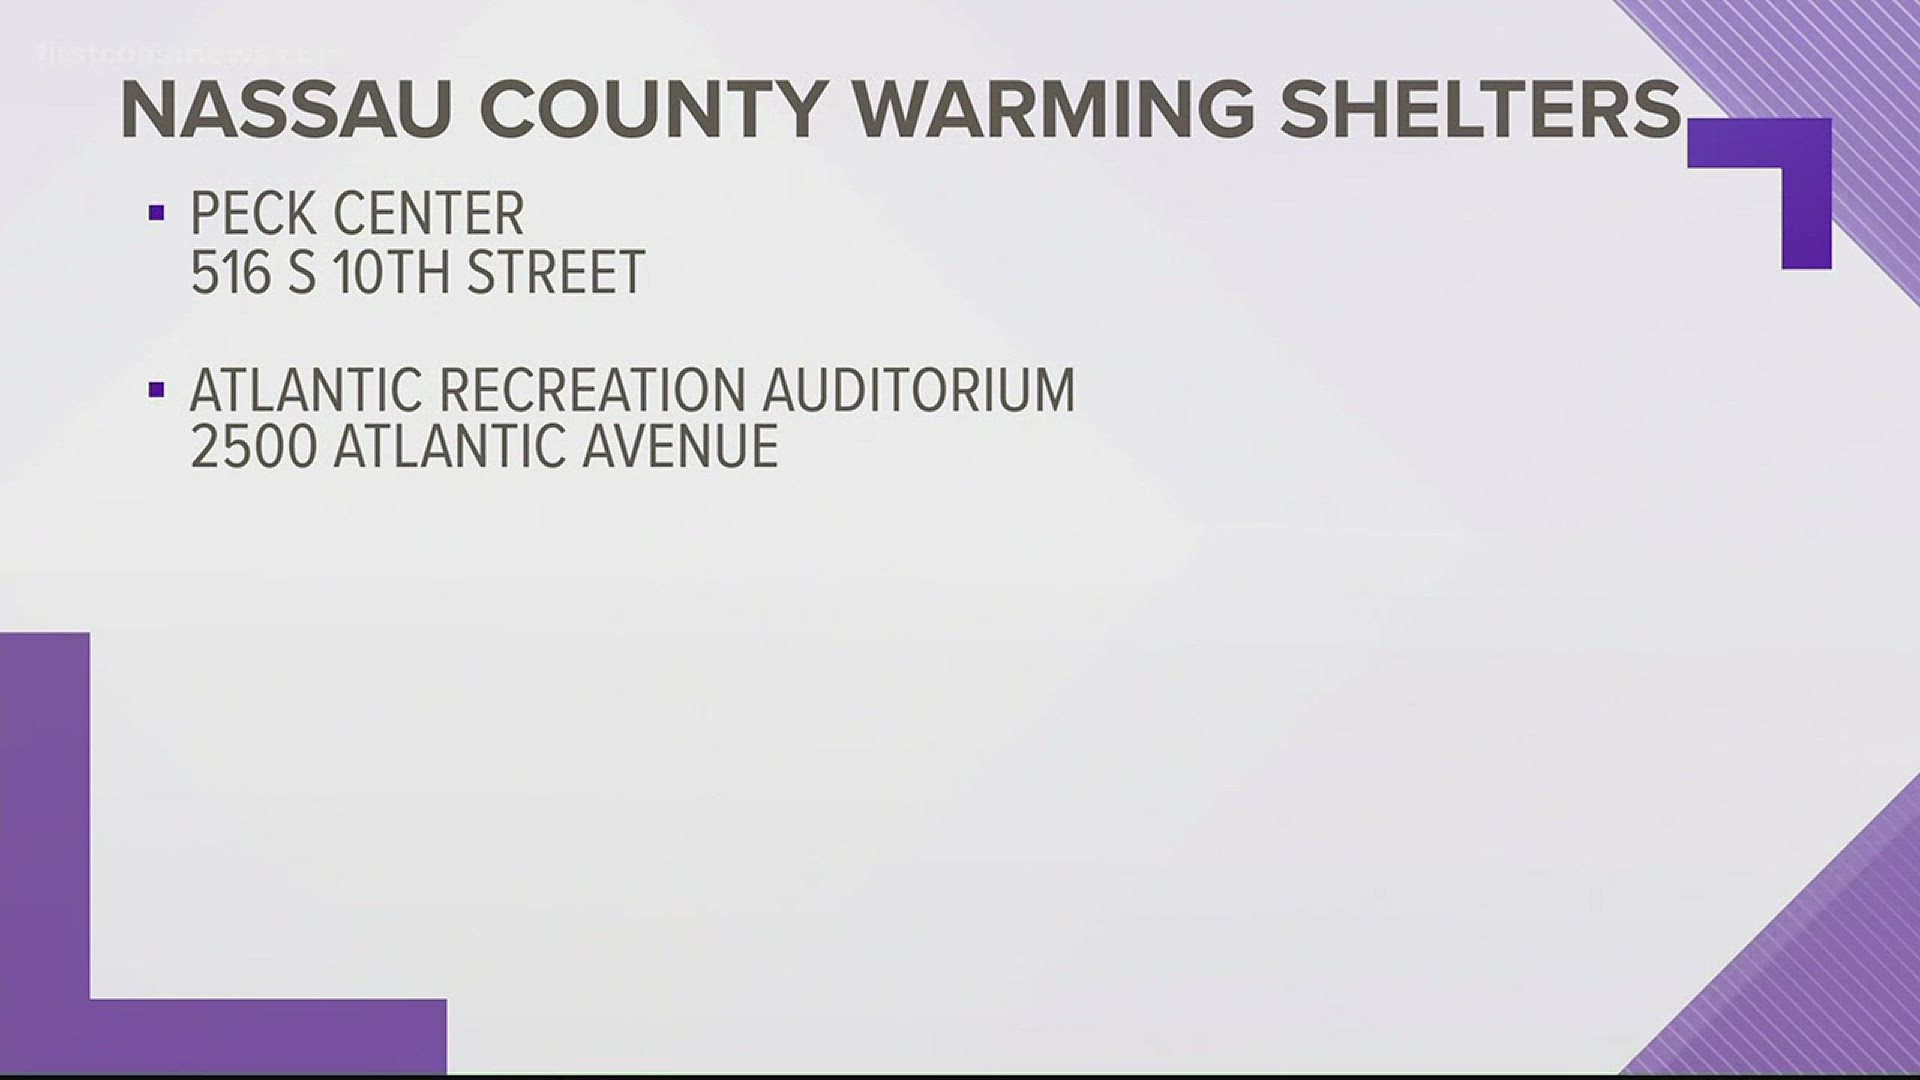 Several shelters from Duval to Nassau are offering shelter to help people get out of the cold.